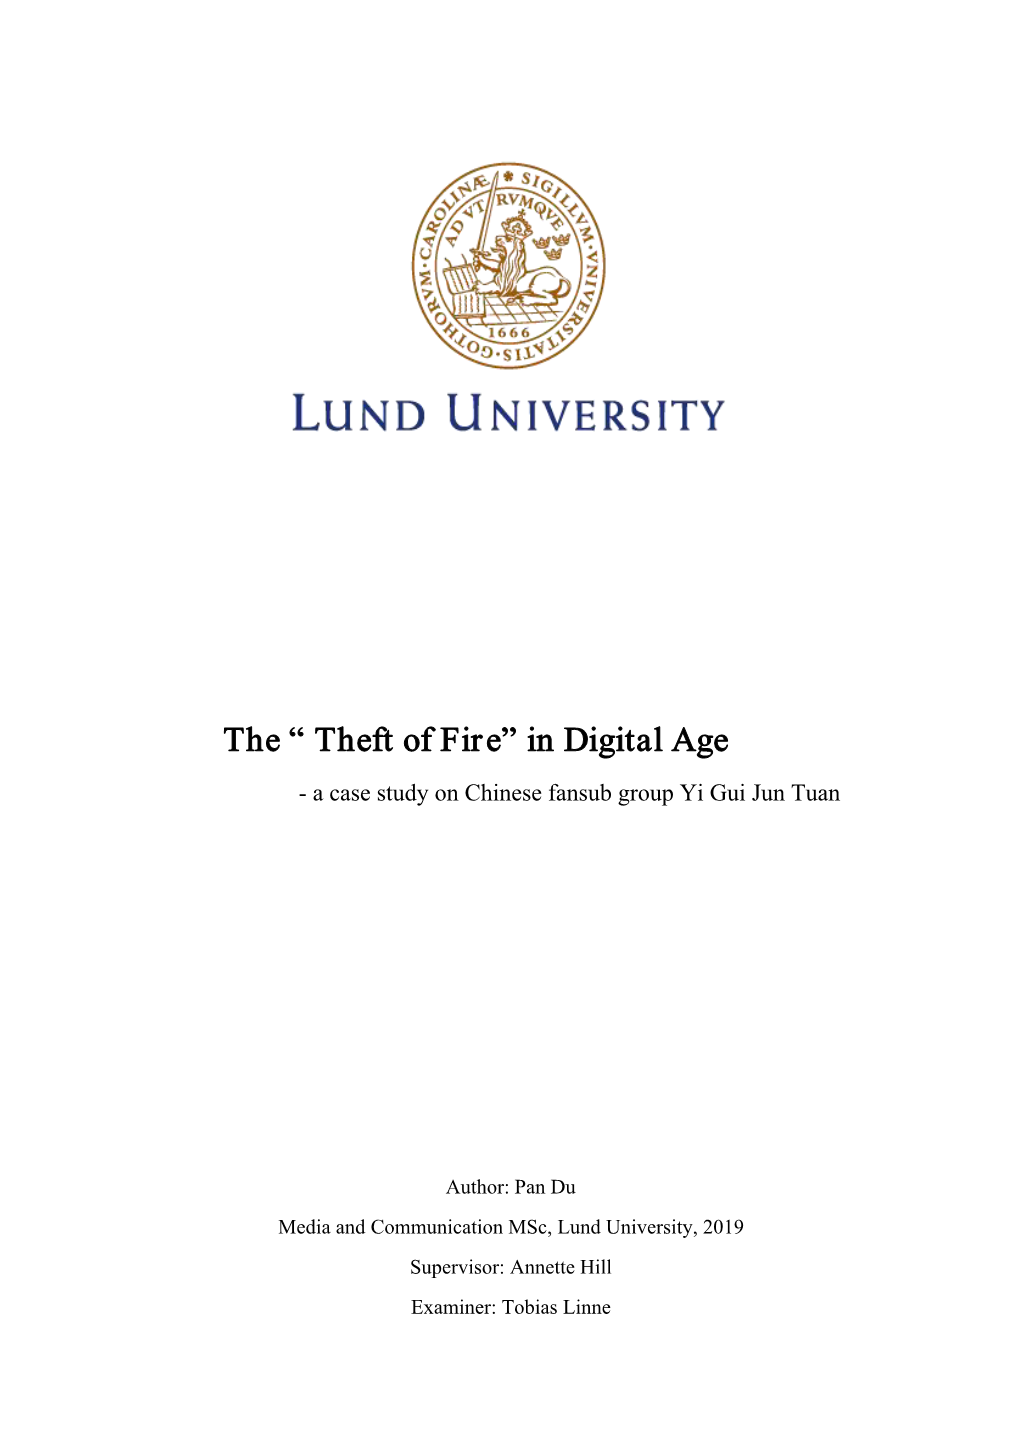 The “ Theft of Fire” in Digital Age - a Case Study on Chinese Fansub Group Yi Gui Jun Tuan